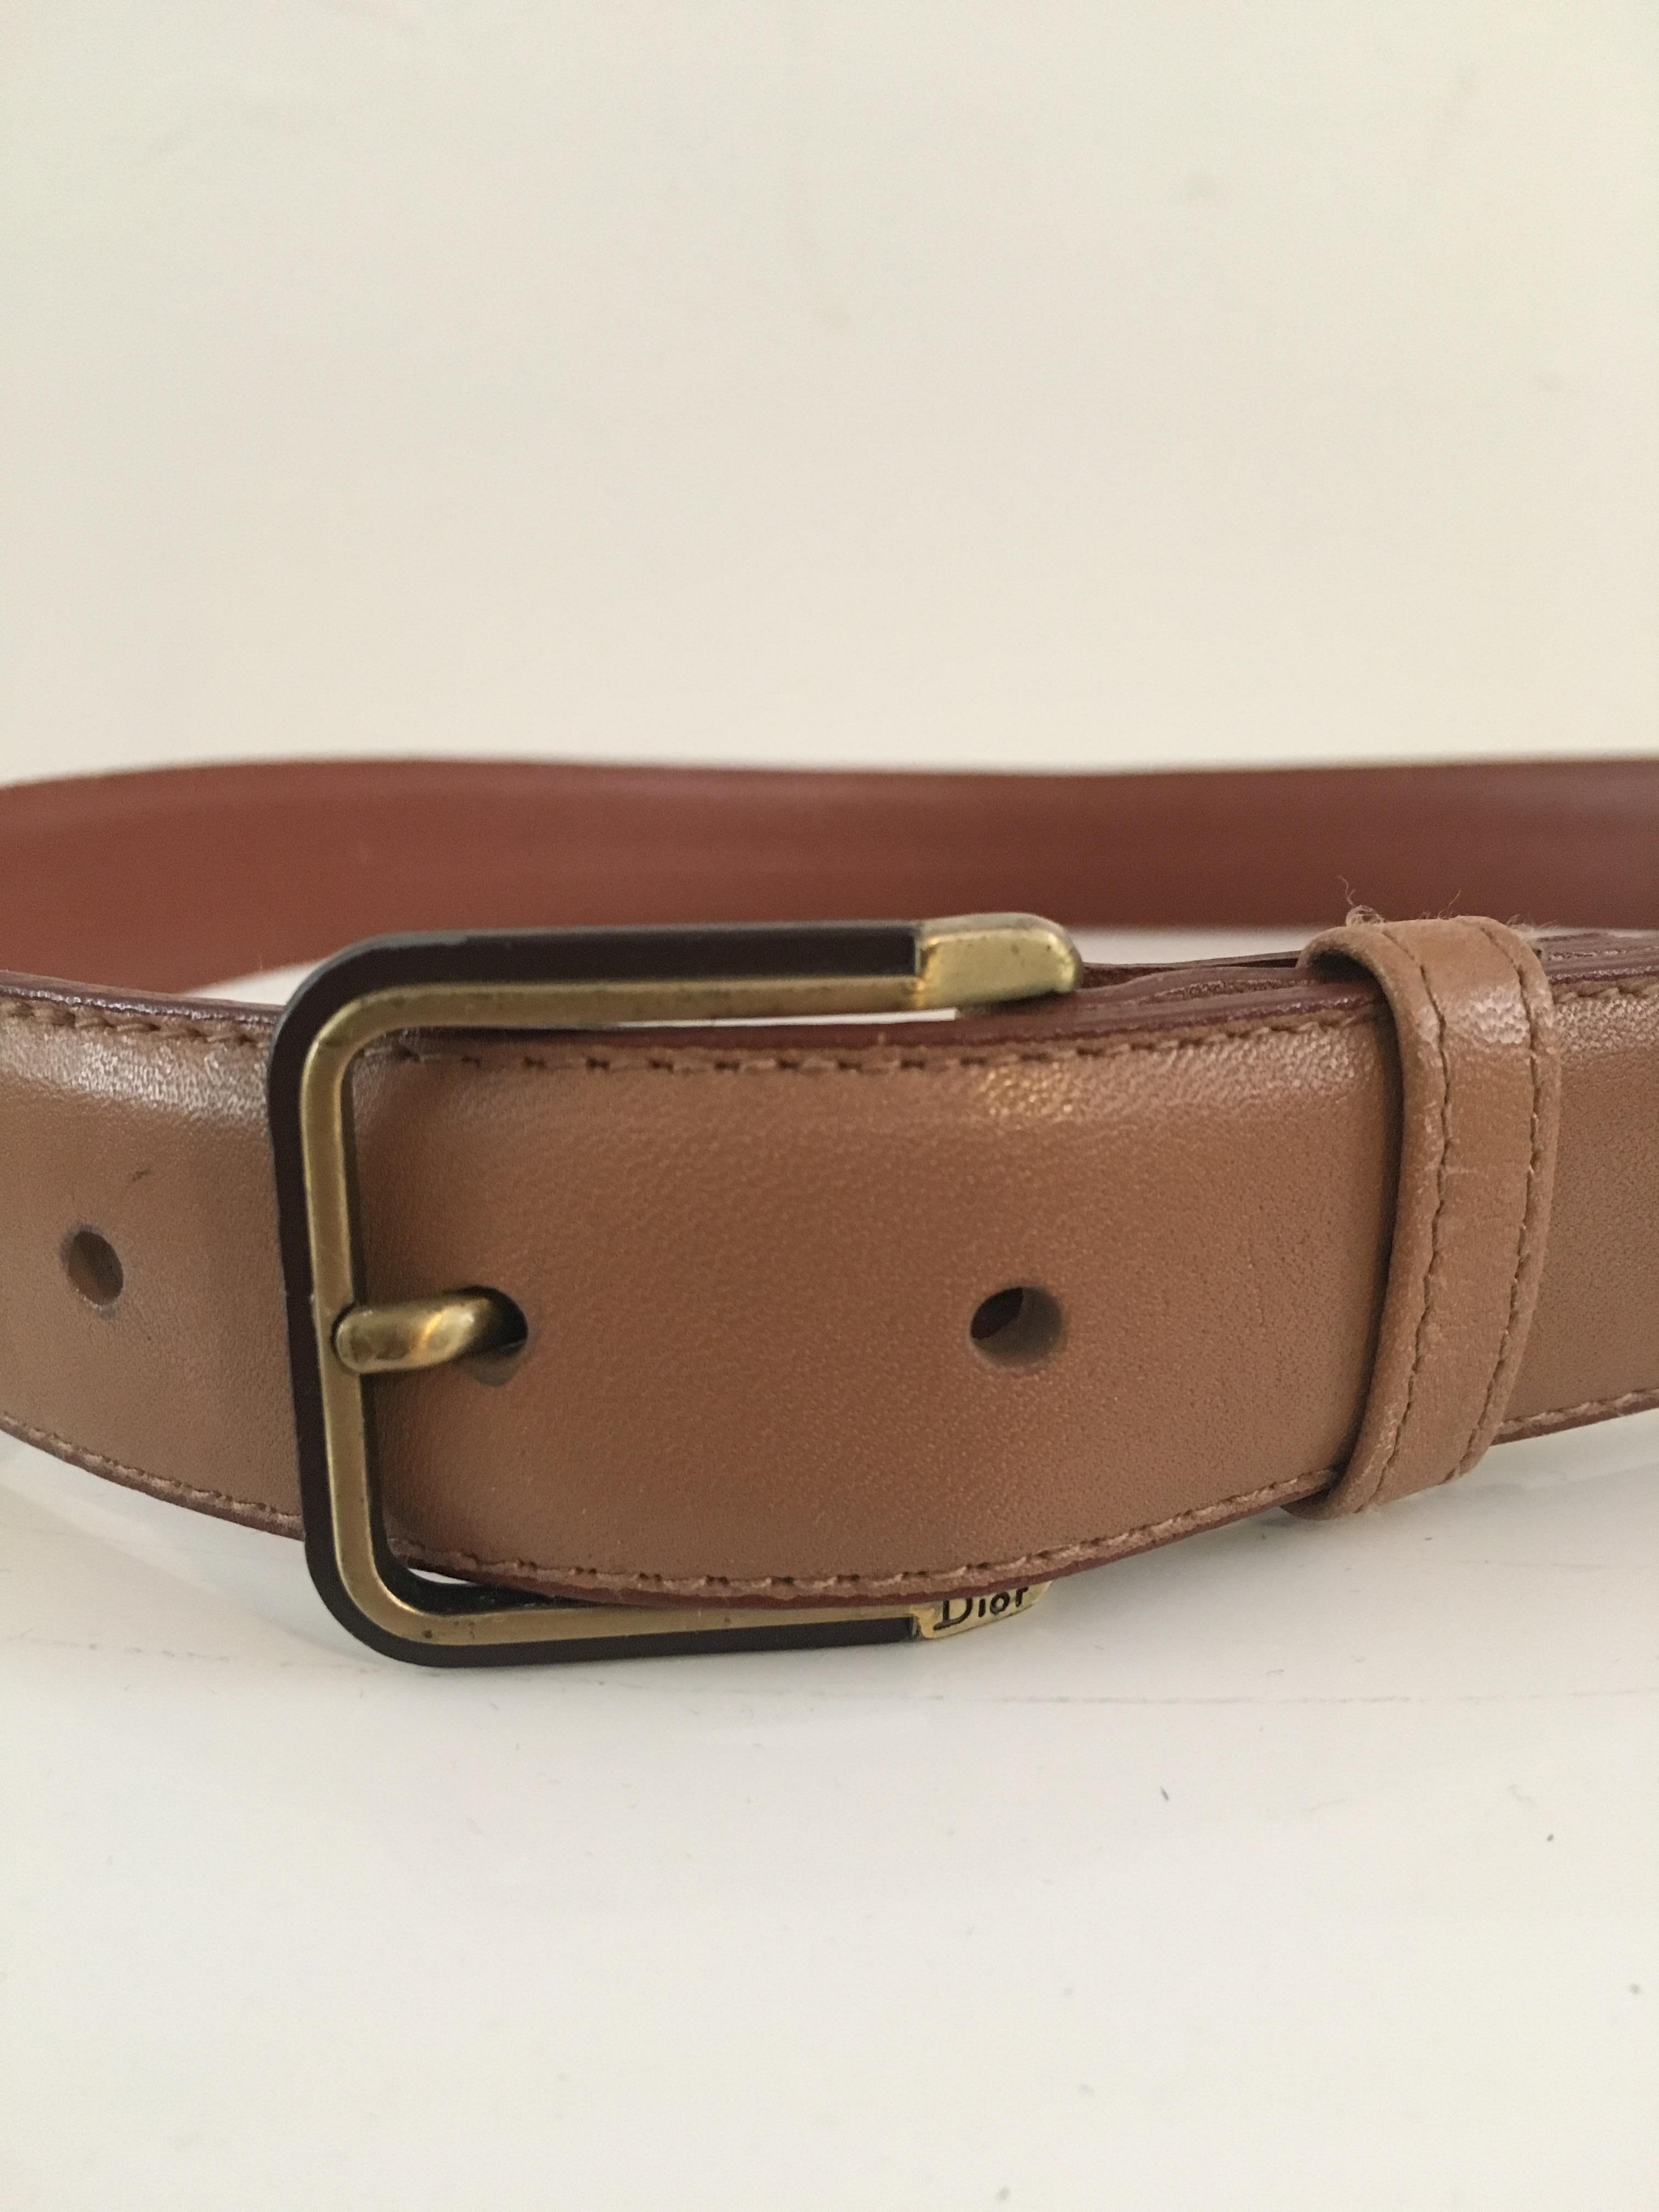 Dior 1990s tan leather belt.  This belt if worn on your waist will fit a size 2, 4, 6.
28. 1/2